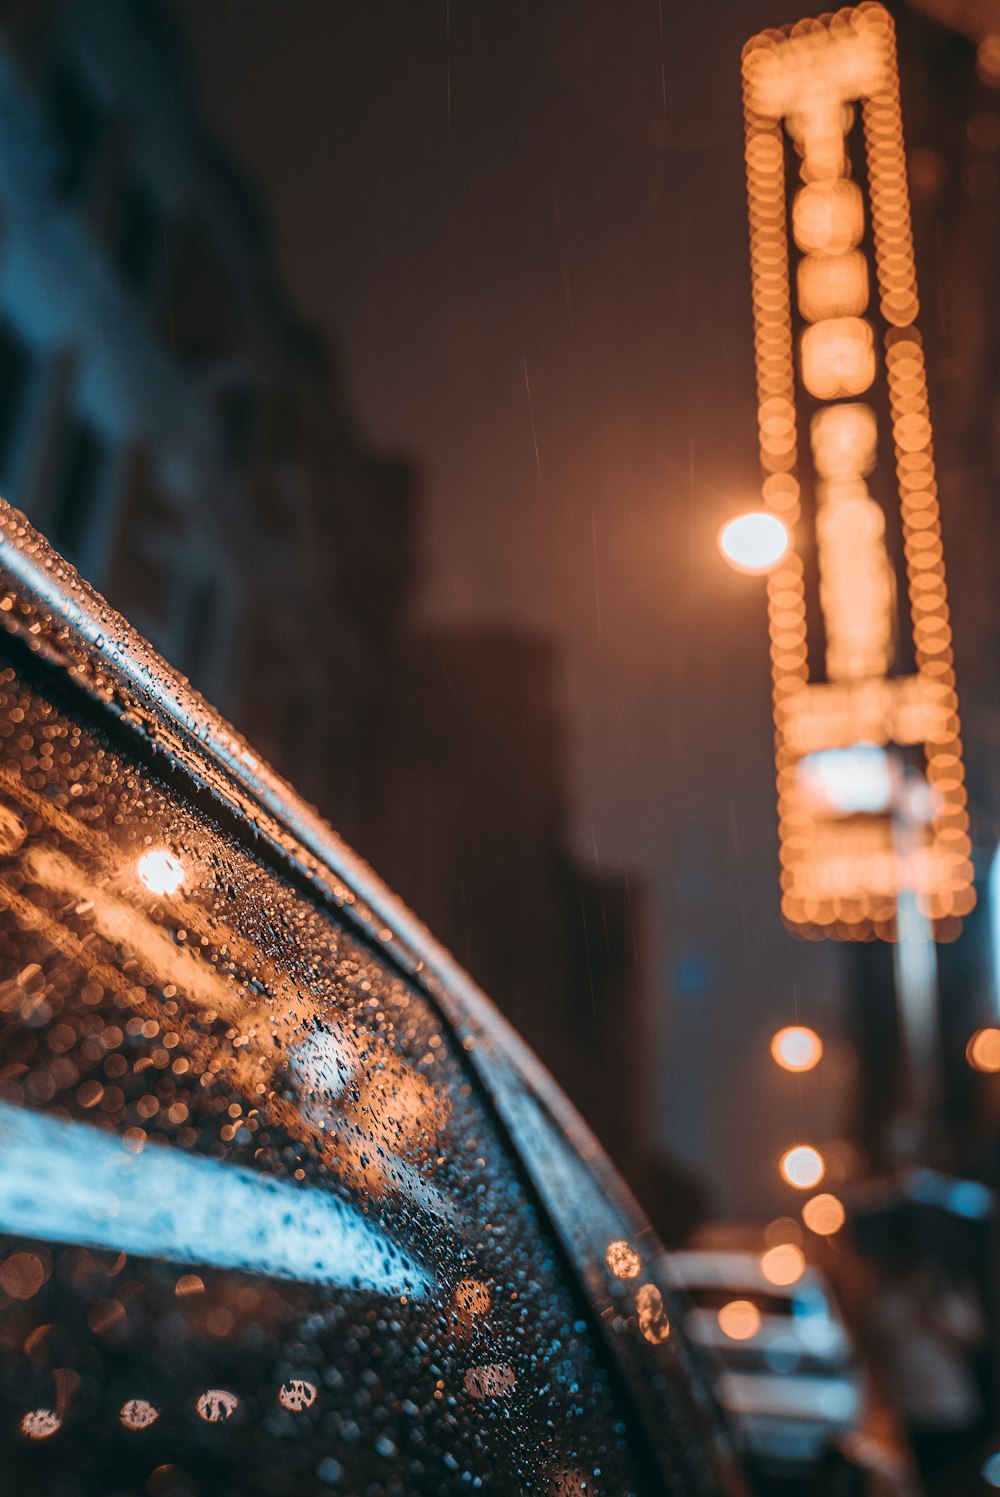 a rainy night in a city with a neon sign in the background